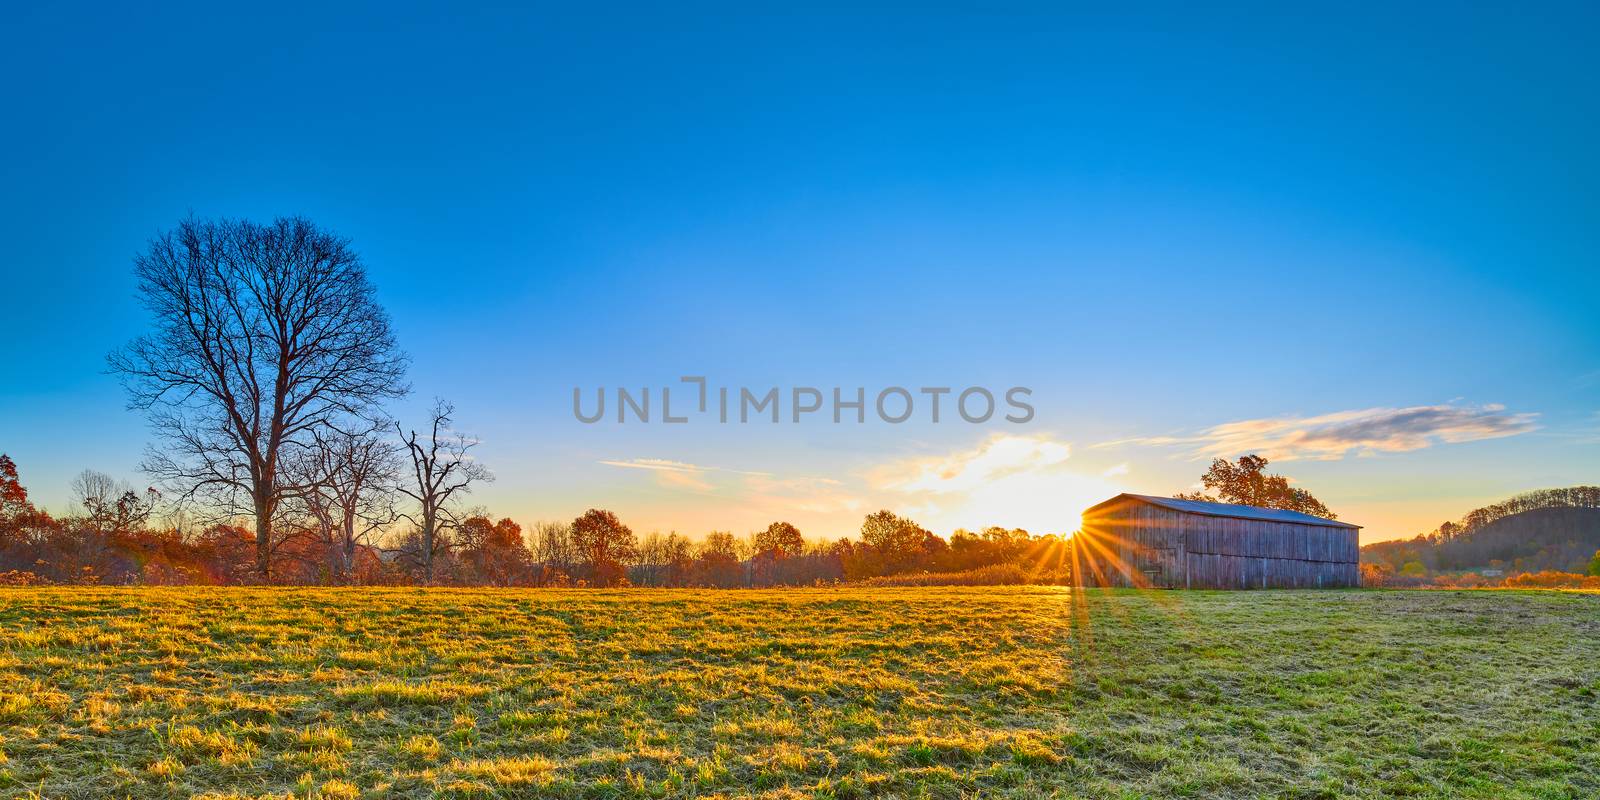 Tobacco barn at sunrise in Gravel Switch, Kentucky. by patrickstock